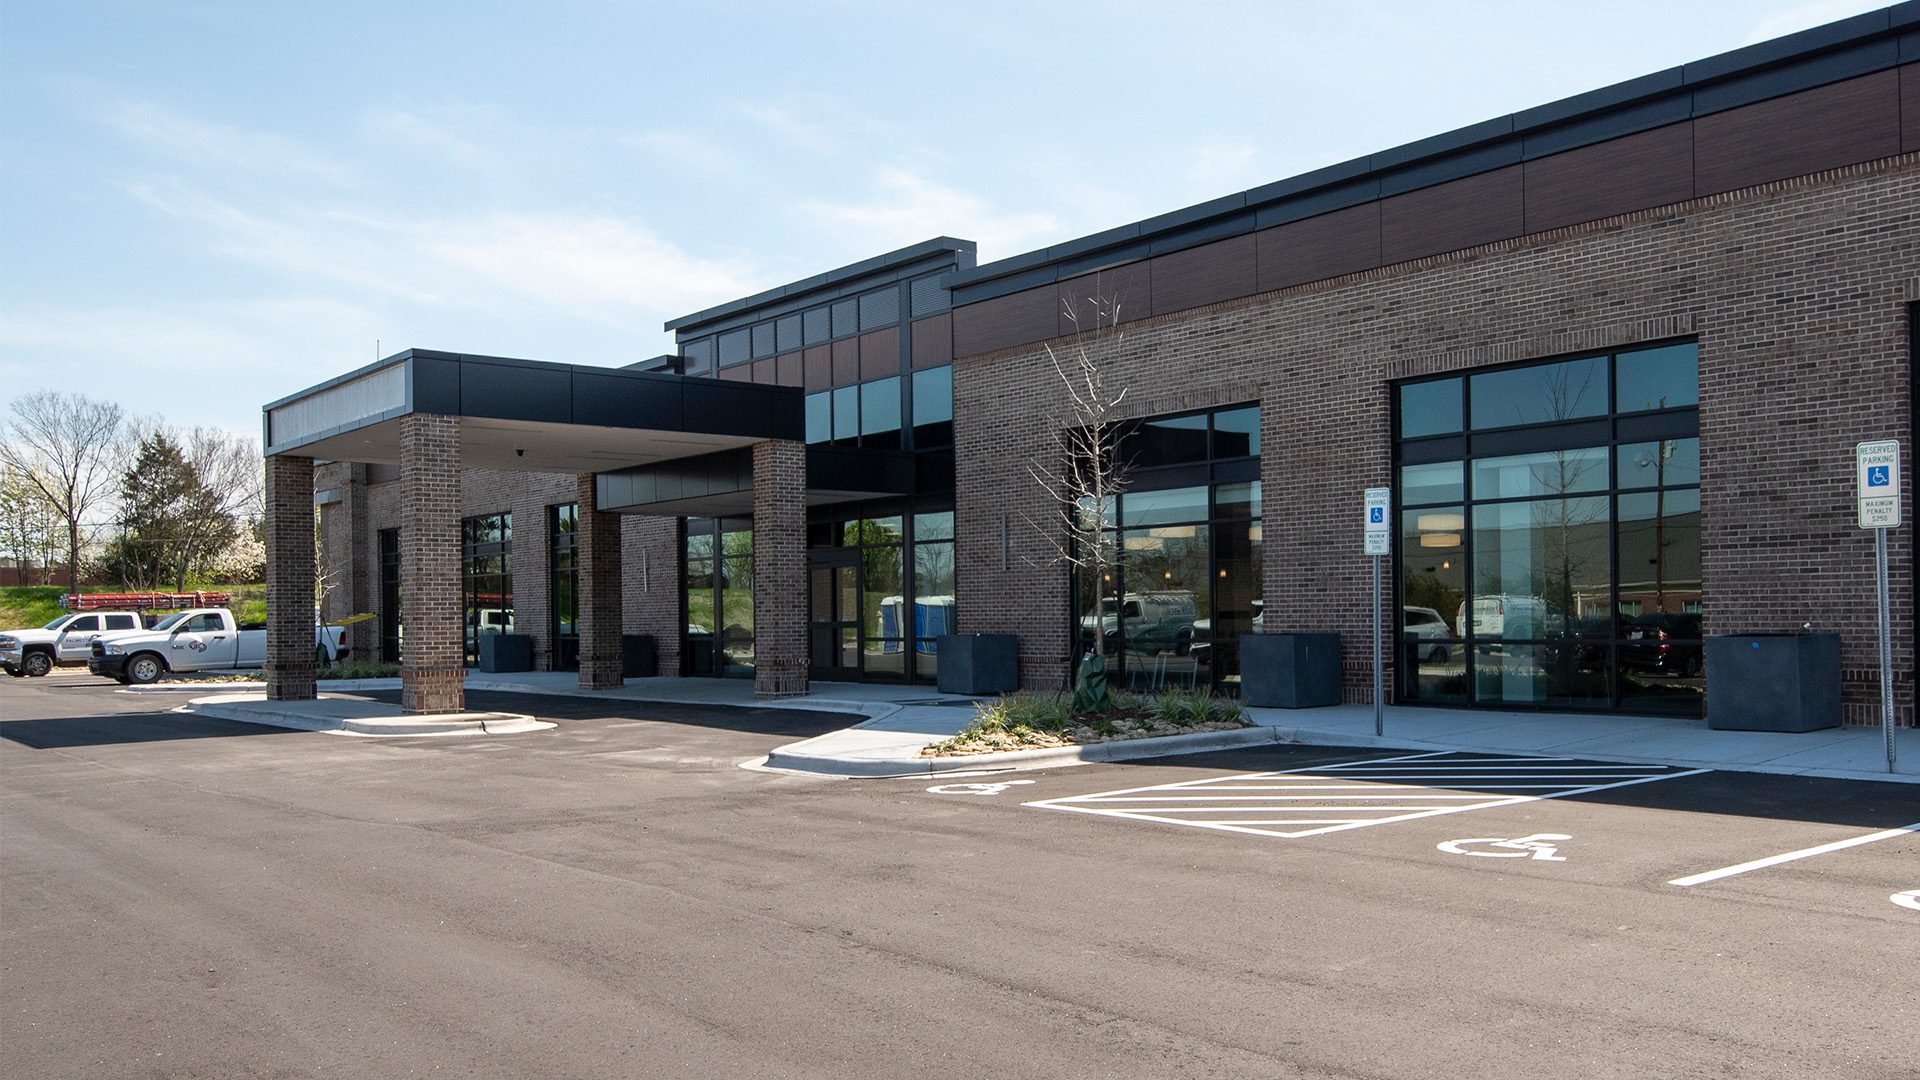 brick and black glass medical office building entrance with covered drive-thru awning